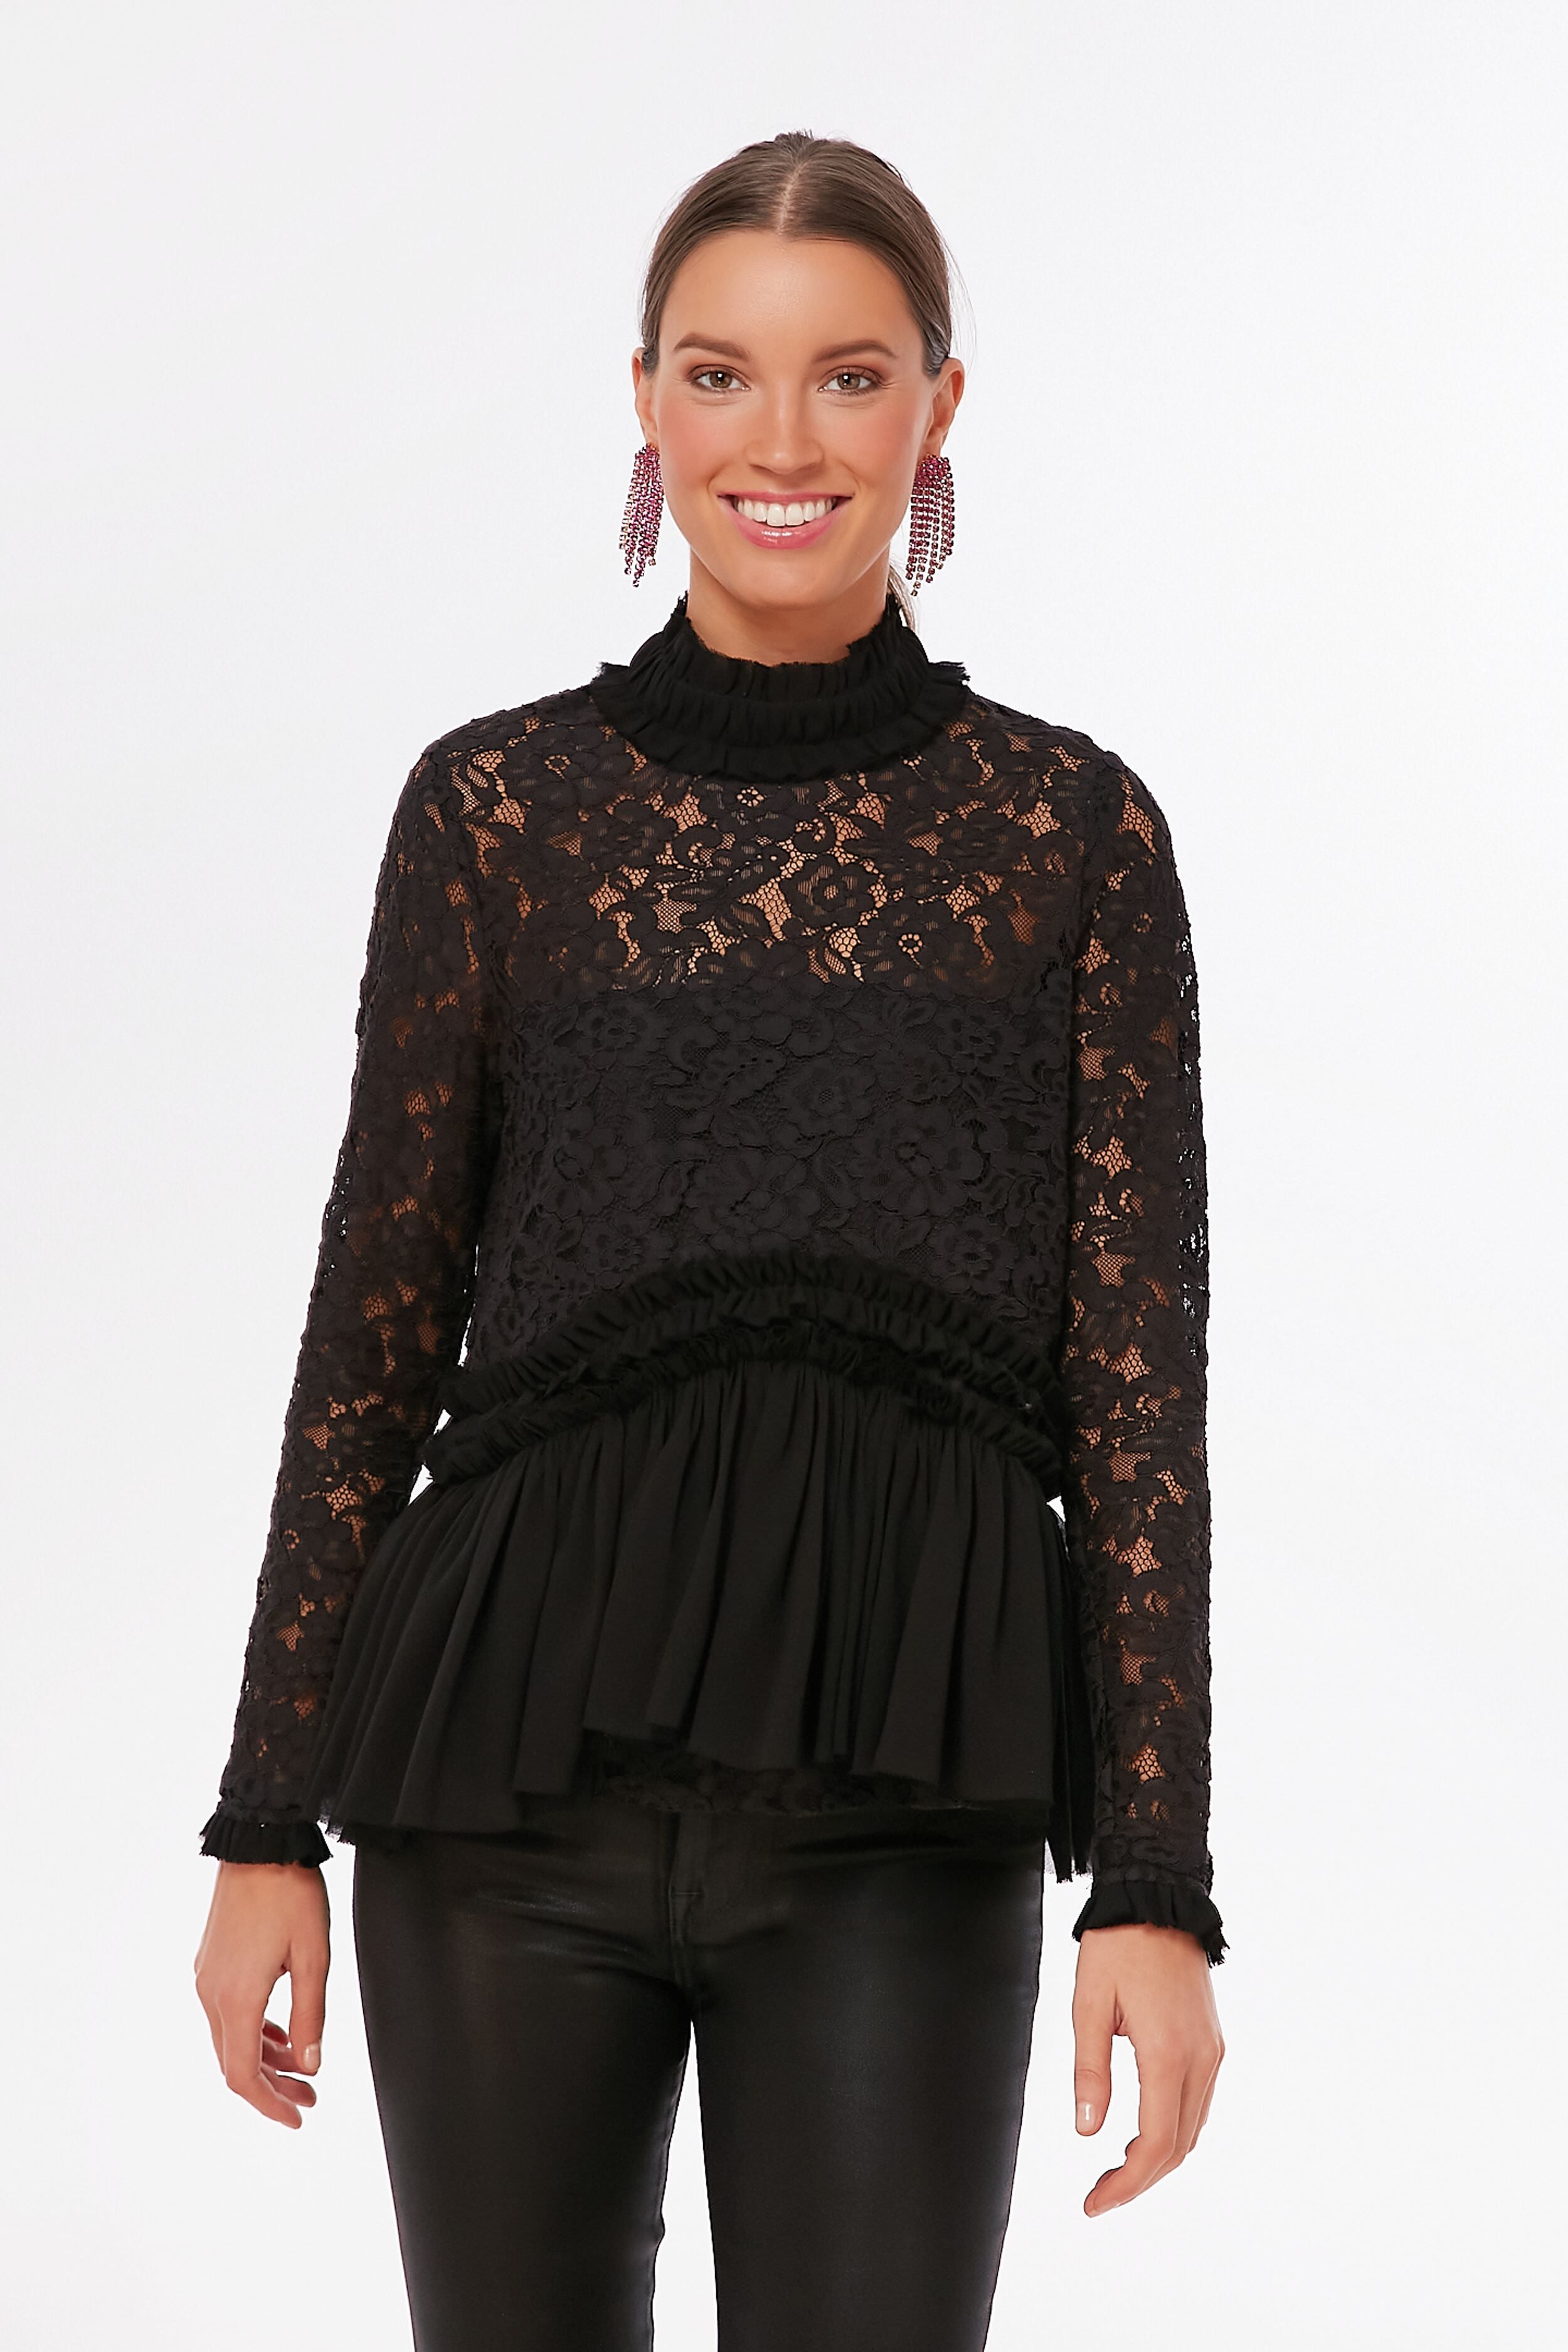 White House black market embroidered mesh top size XS  Black mesh top,  Long sleeve lace tee, Peplum lace top